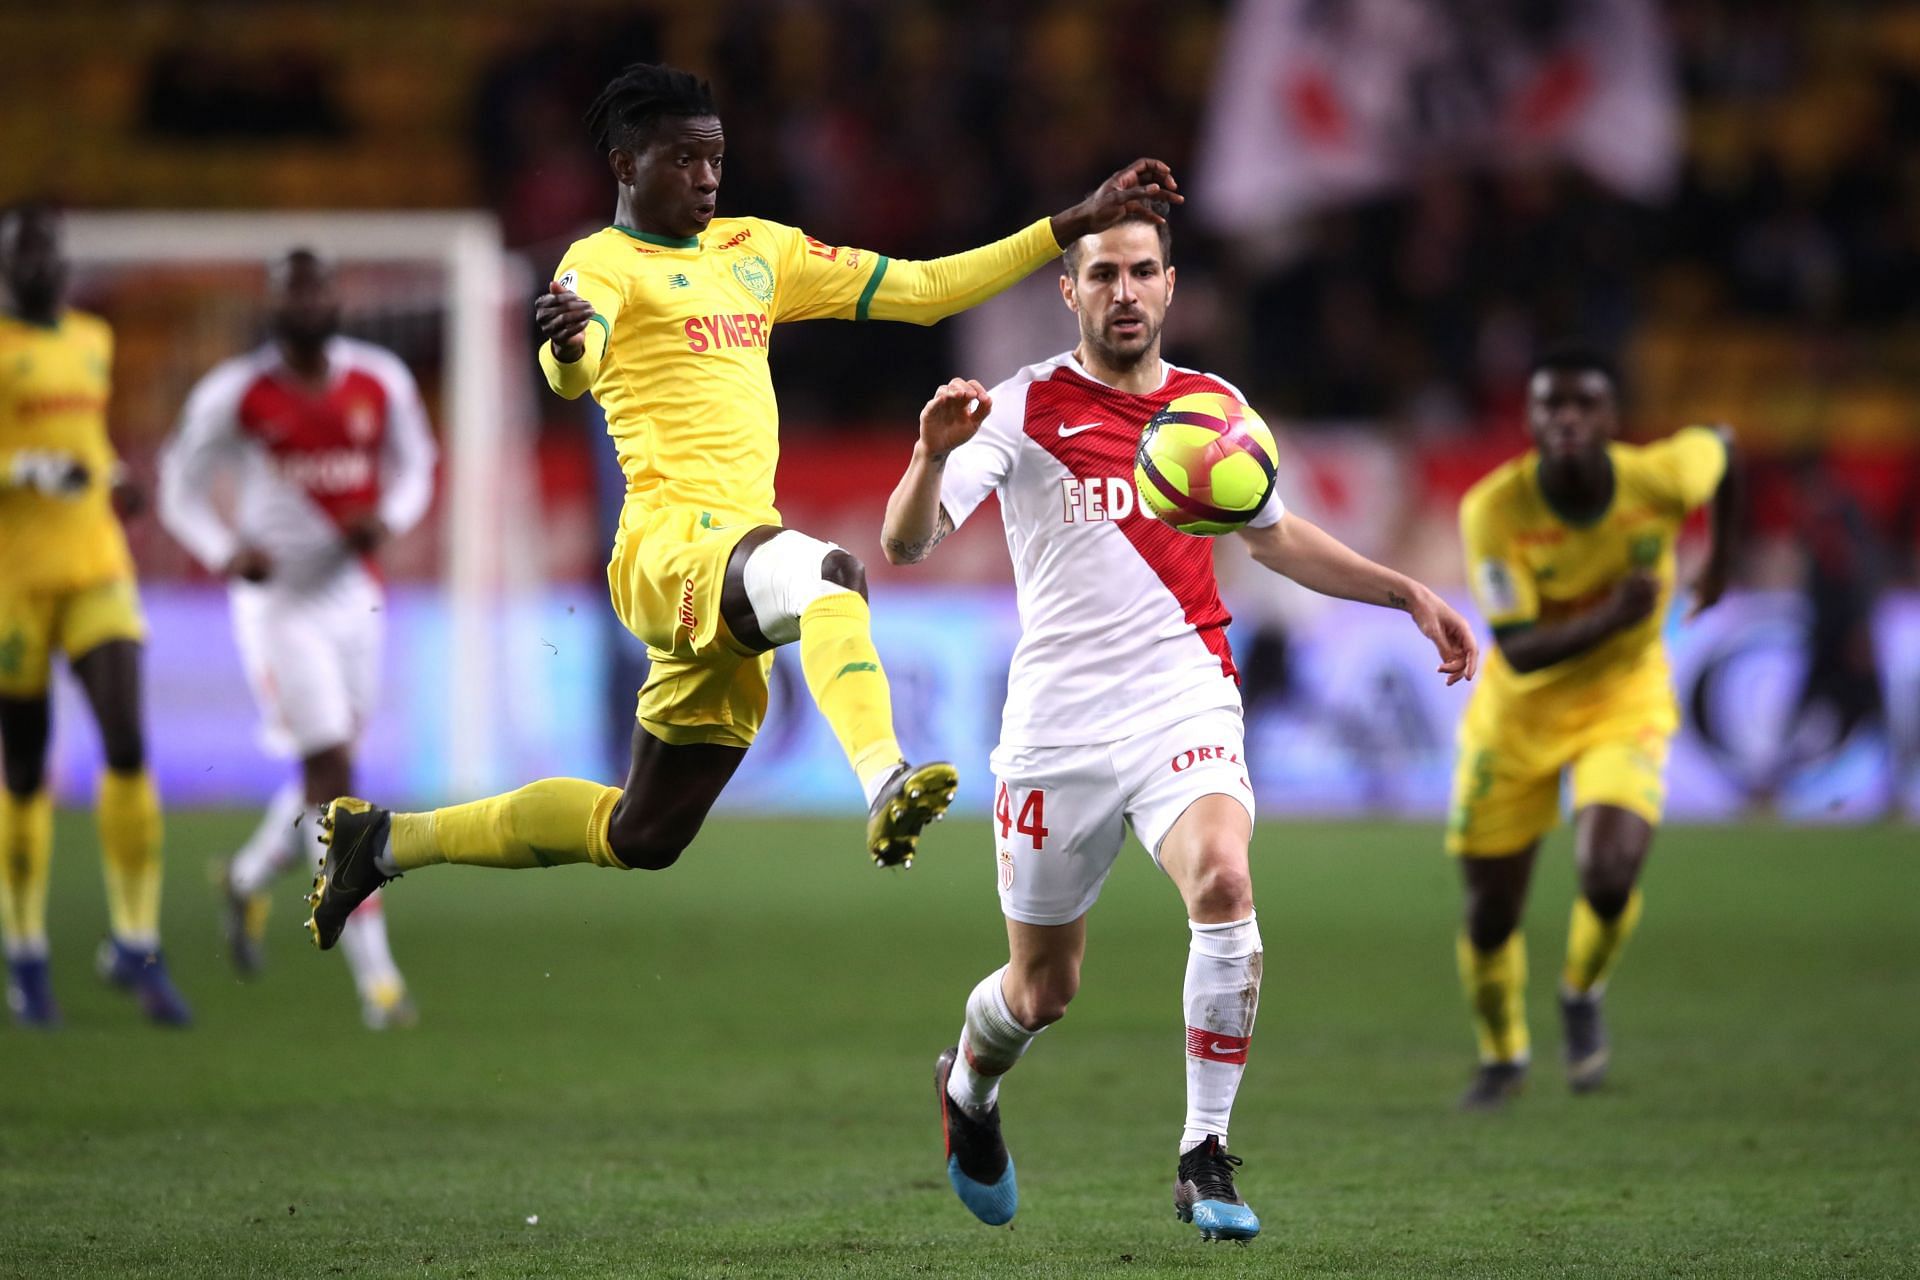 AS Monaco are looking to reach the semi-finals for the second year running